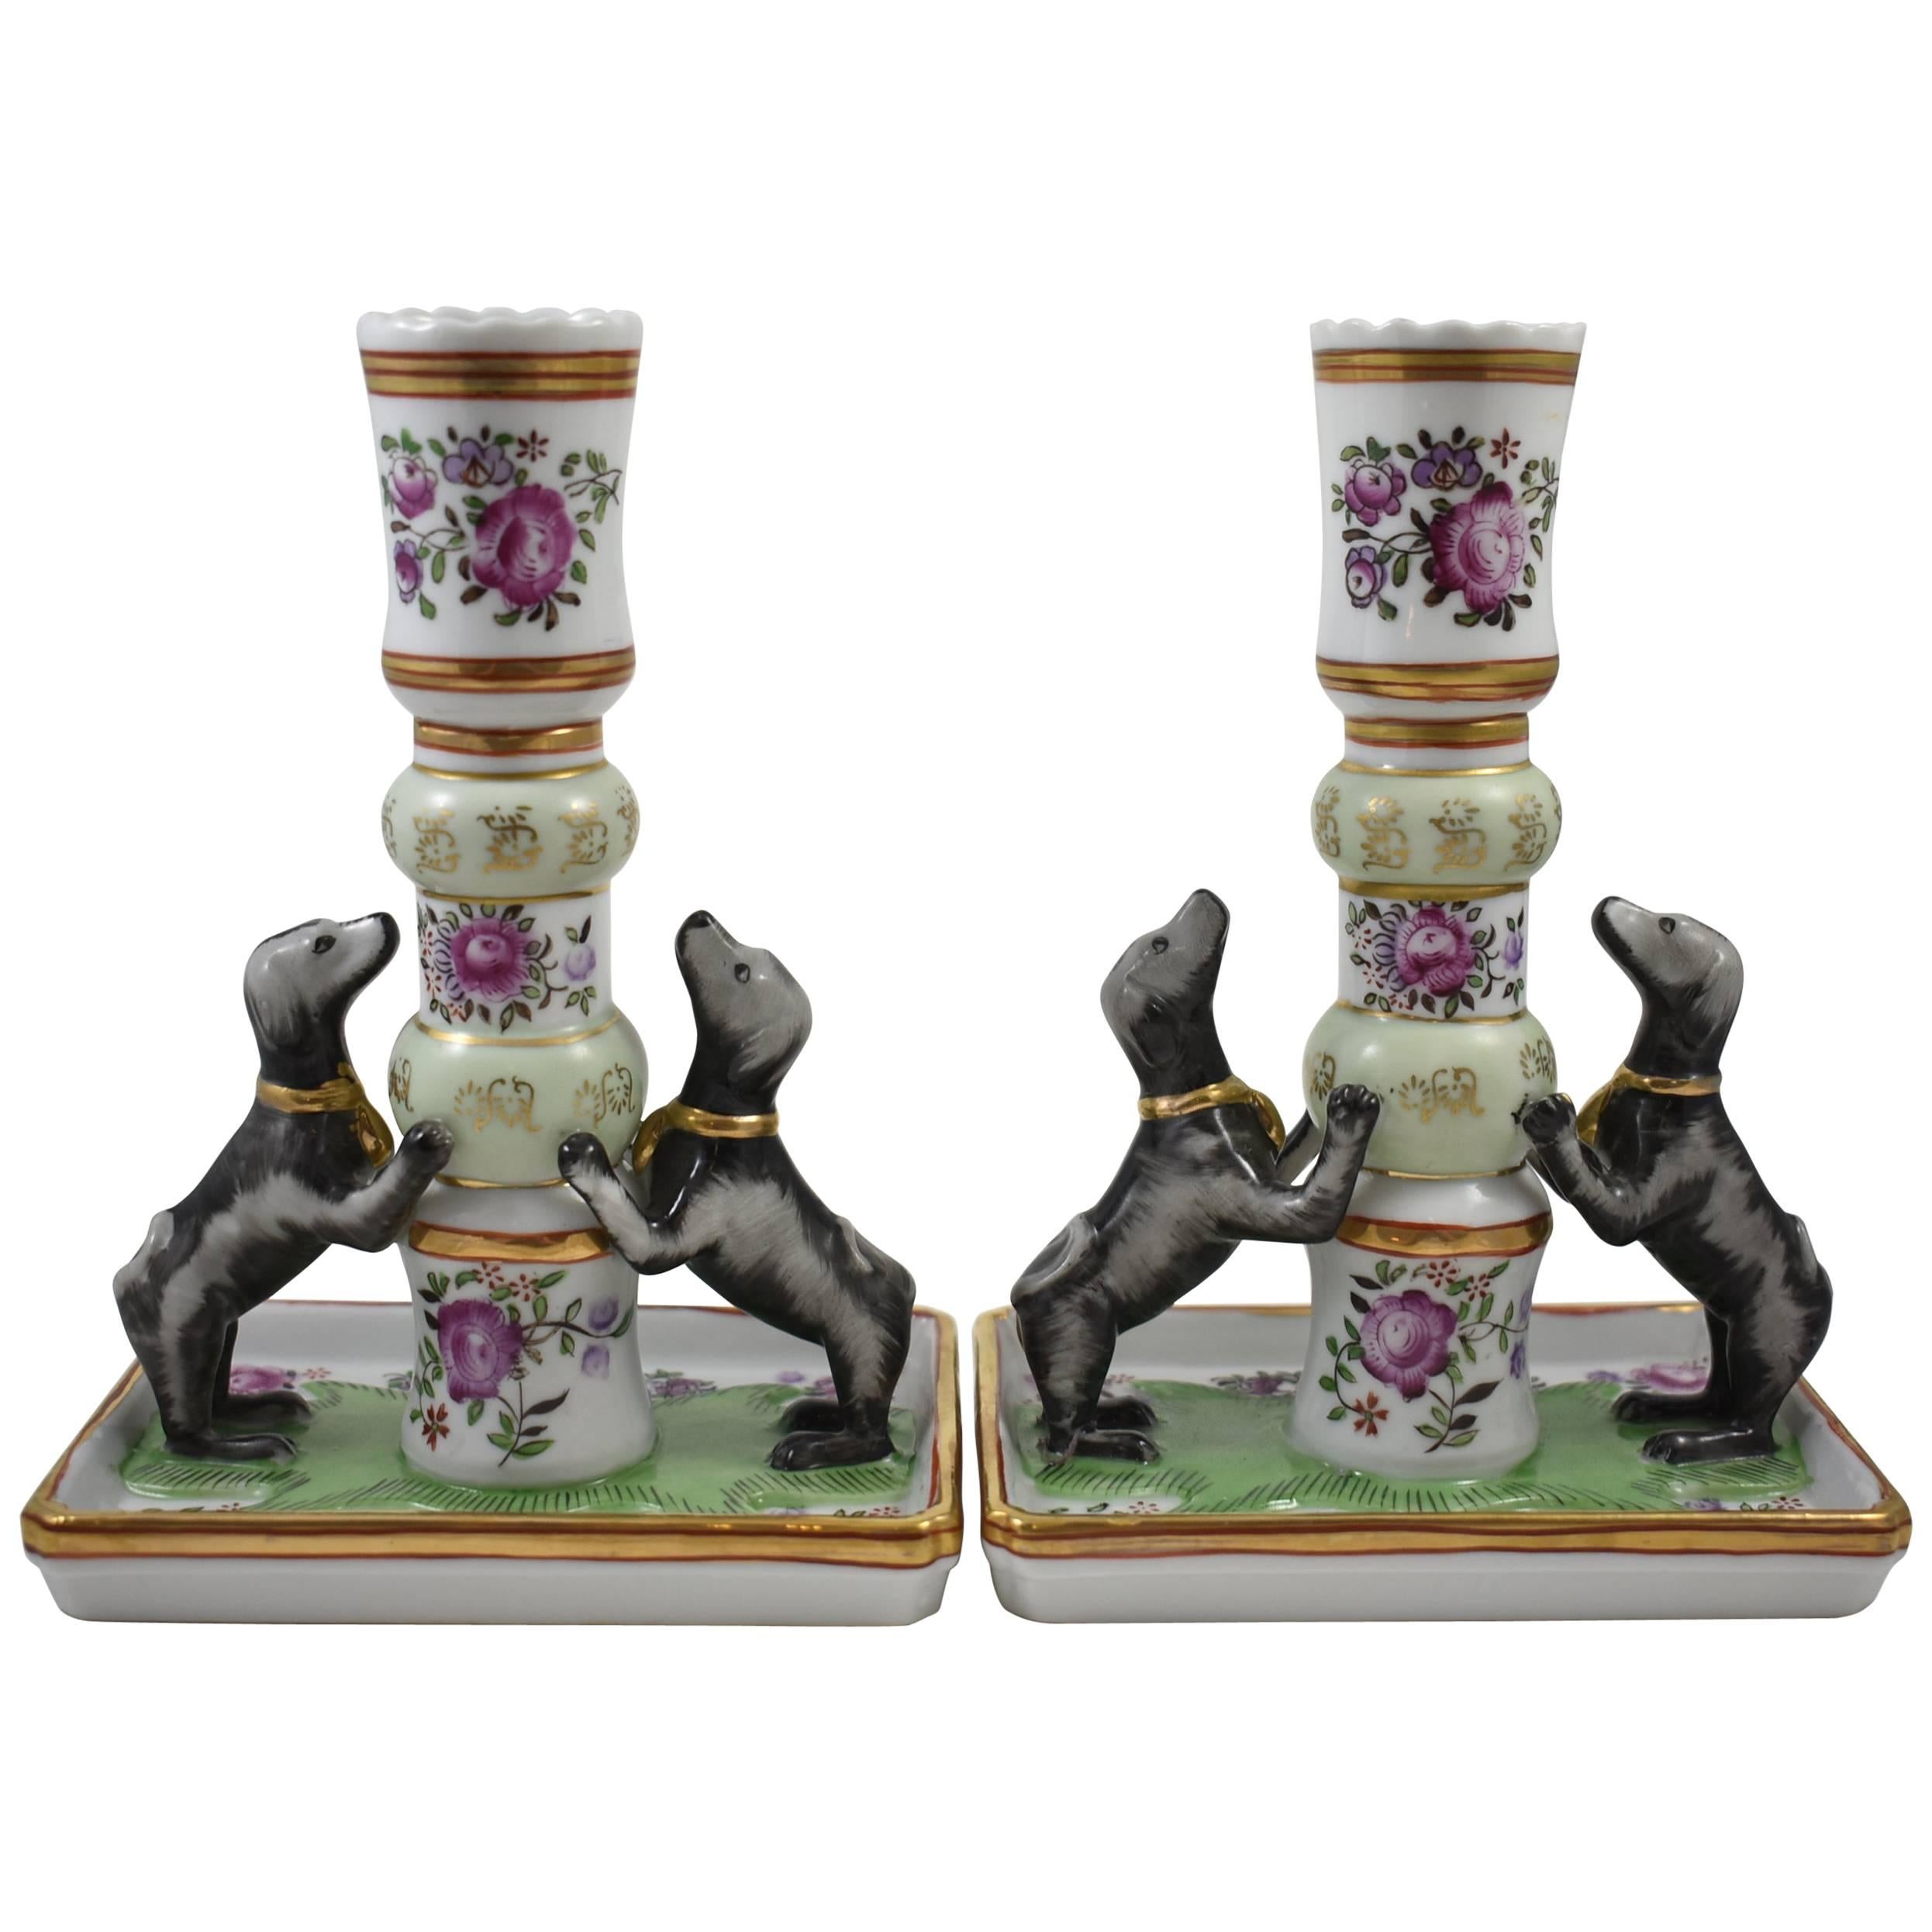 Pair of Handpainted Porcelain Rose Famille Candleholders with Dogs by Mottahedeh